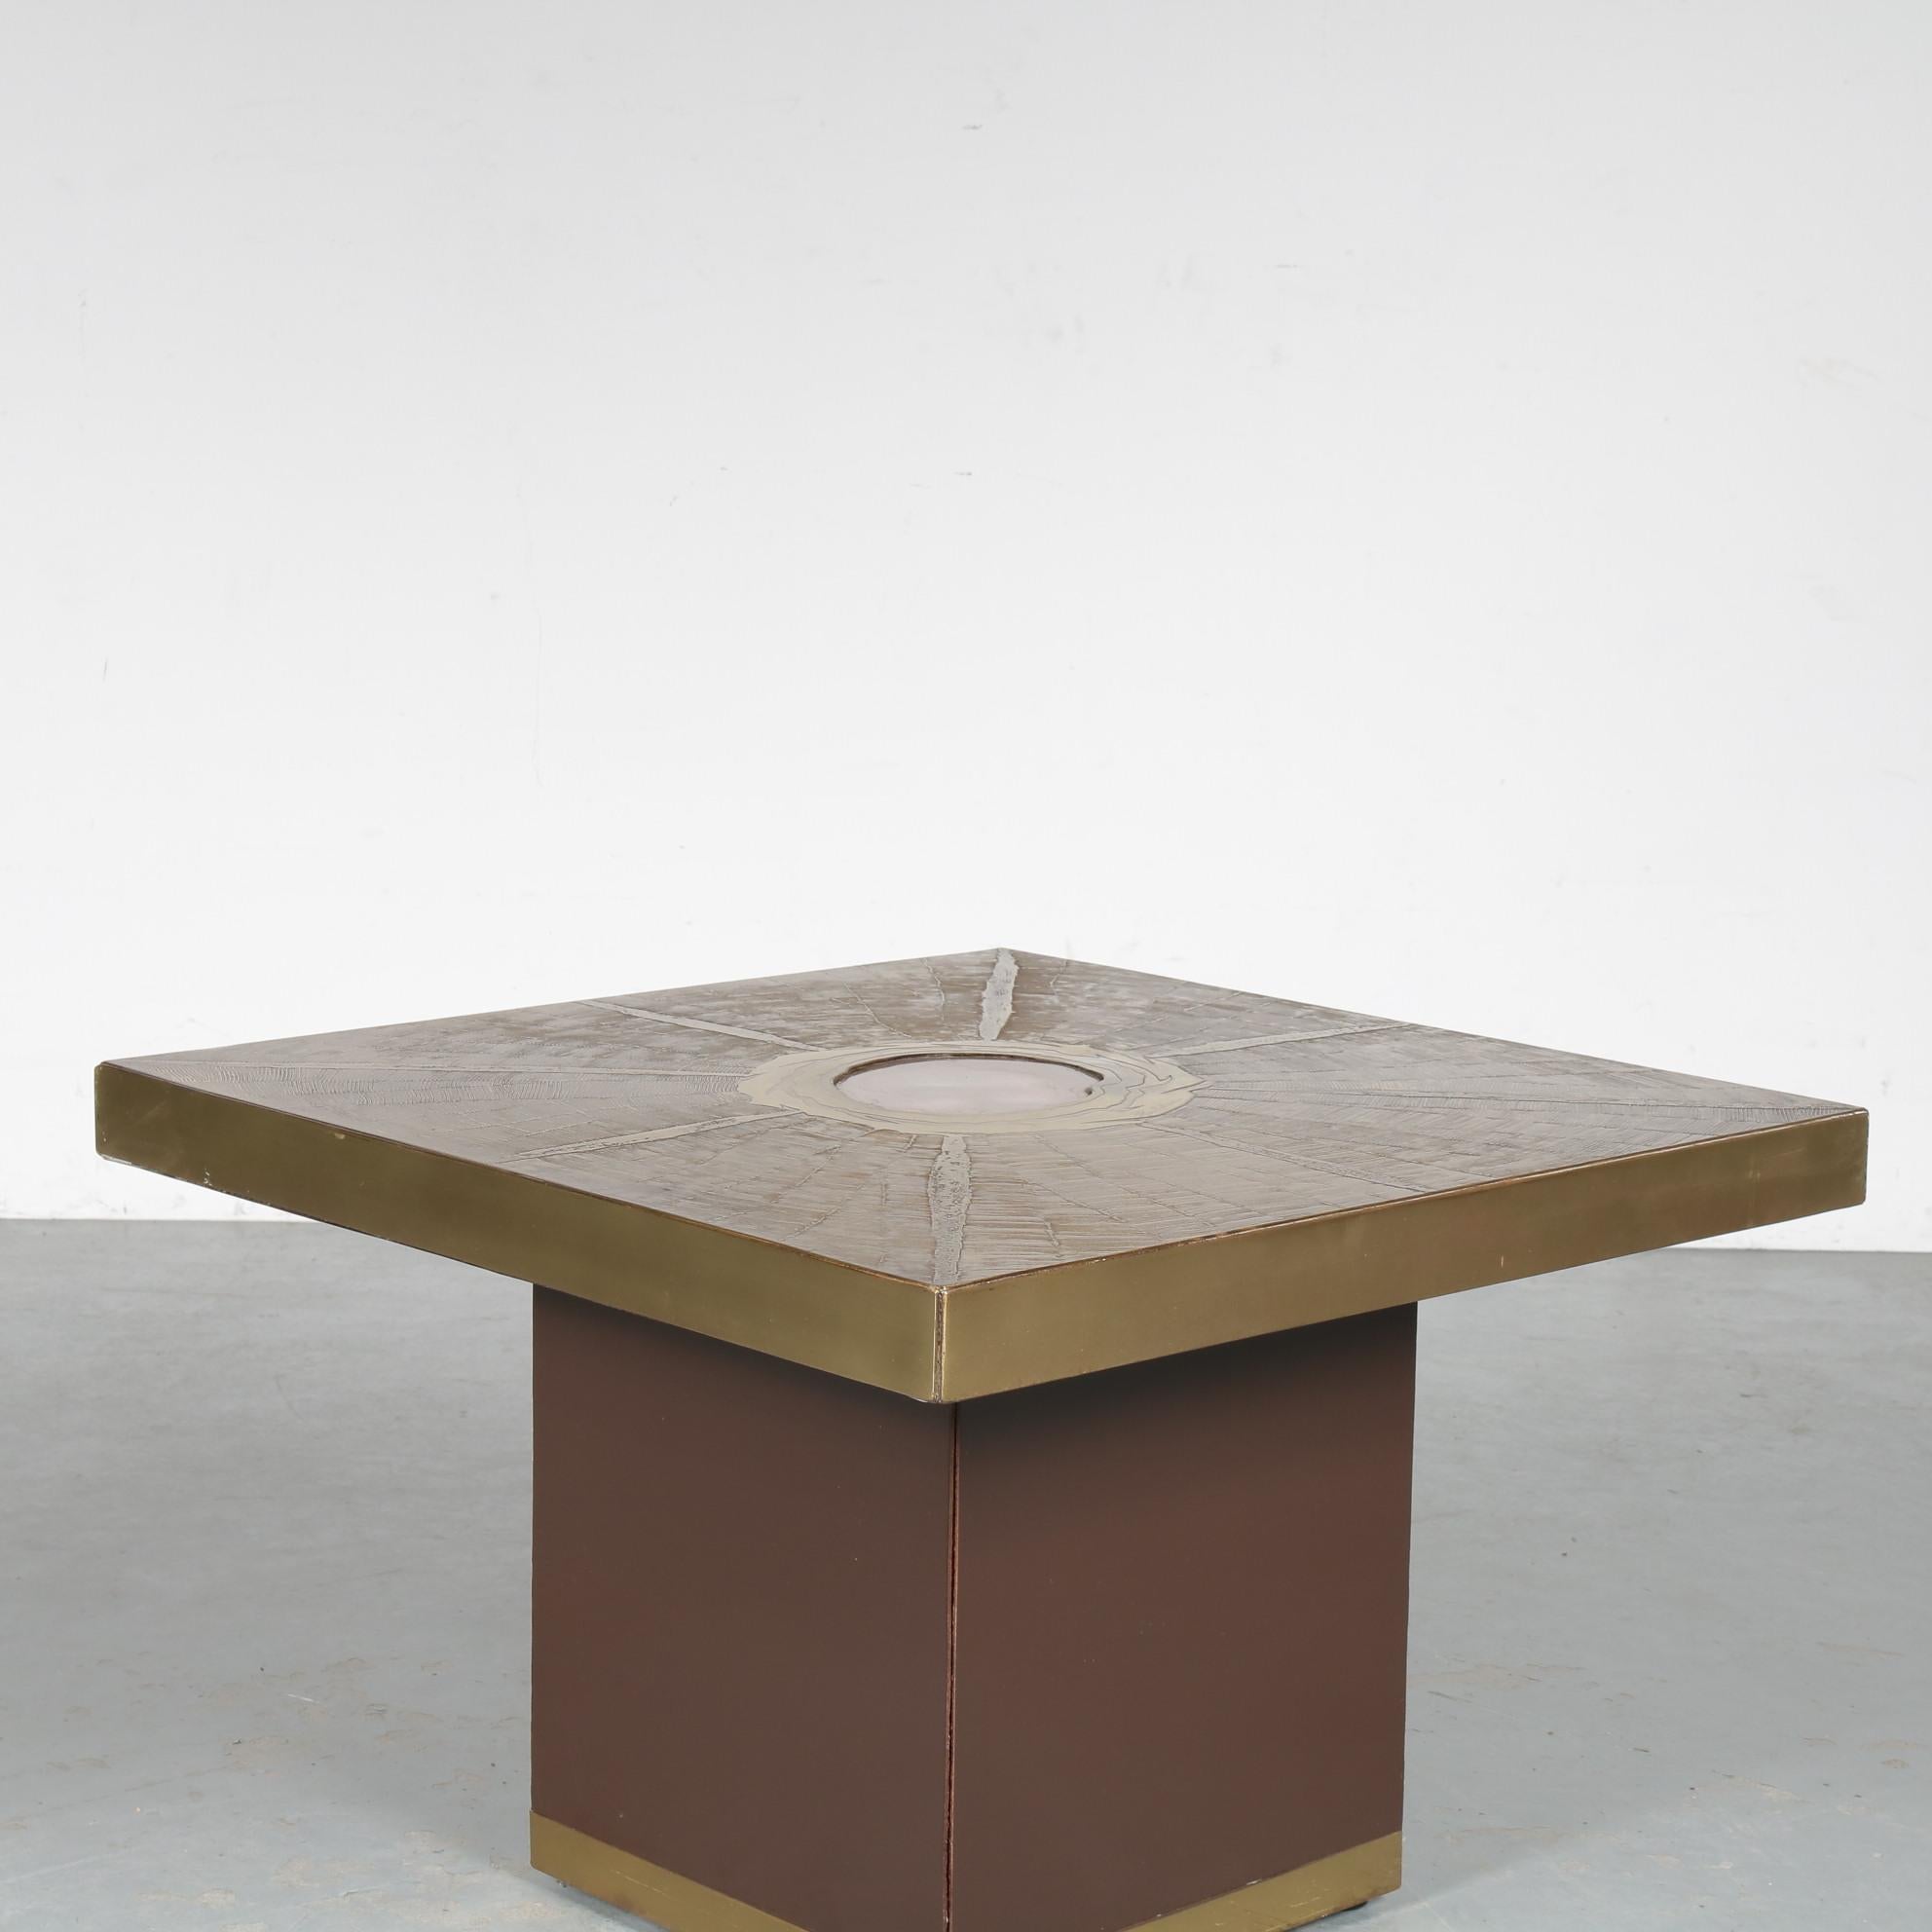 Brass Square Coffee Table by Paco Rabanne for Lova Creation, Belgium 1970 For Sale